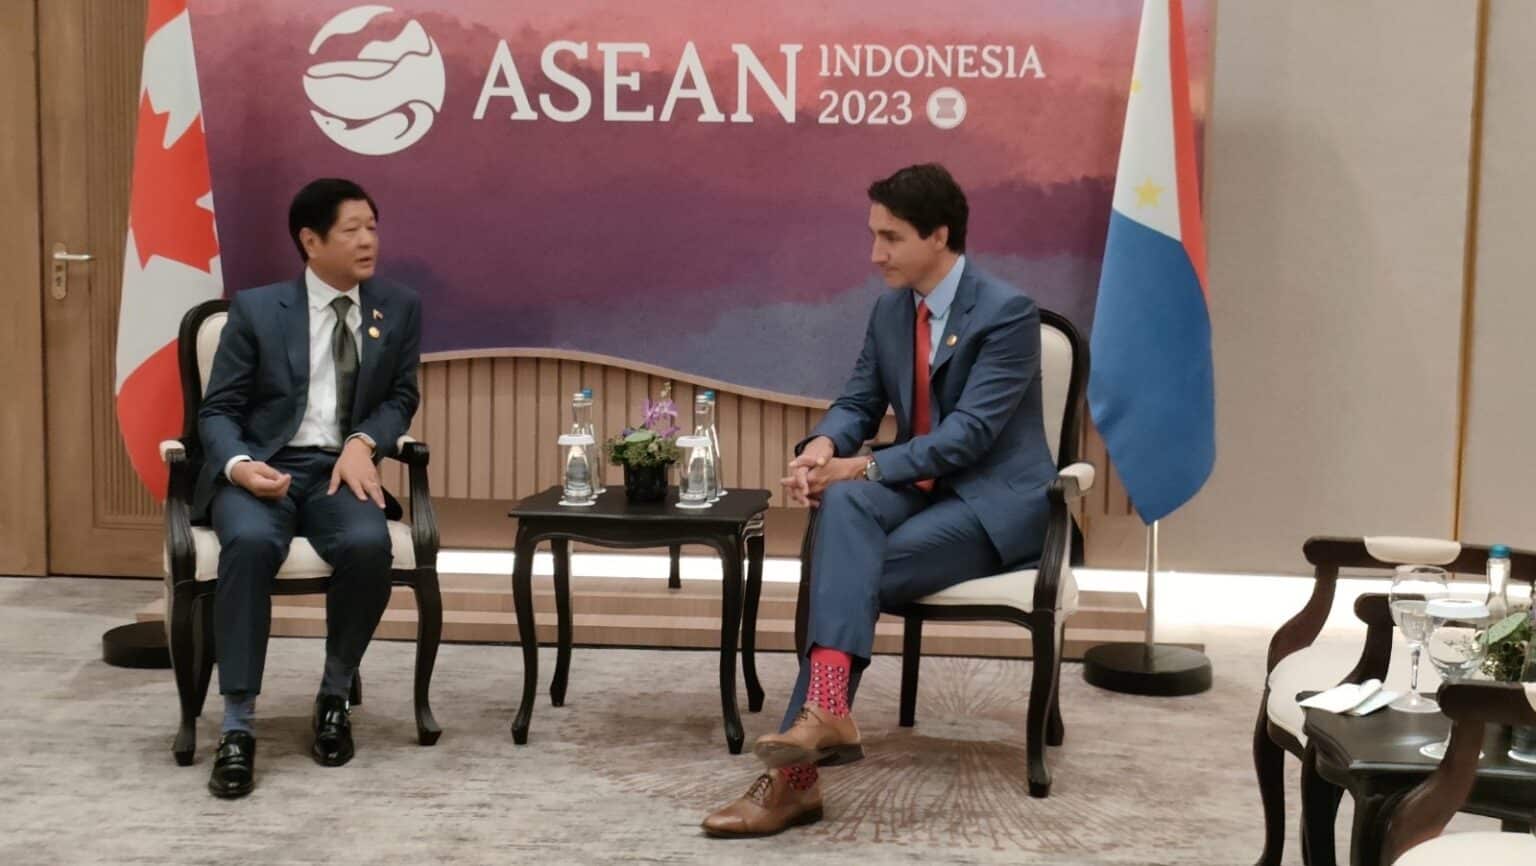 Inverted Philippine flag at Marcos-Trudeau meeting in Indonesia (contributed photo)